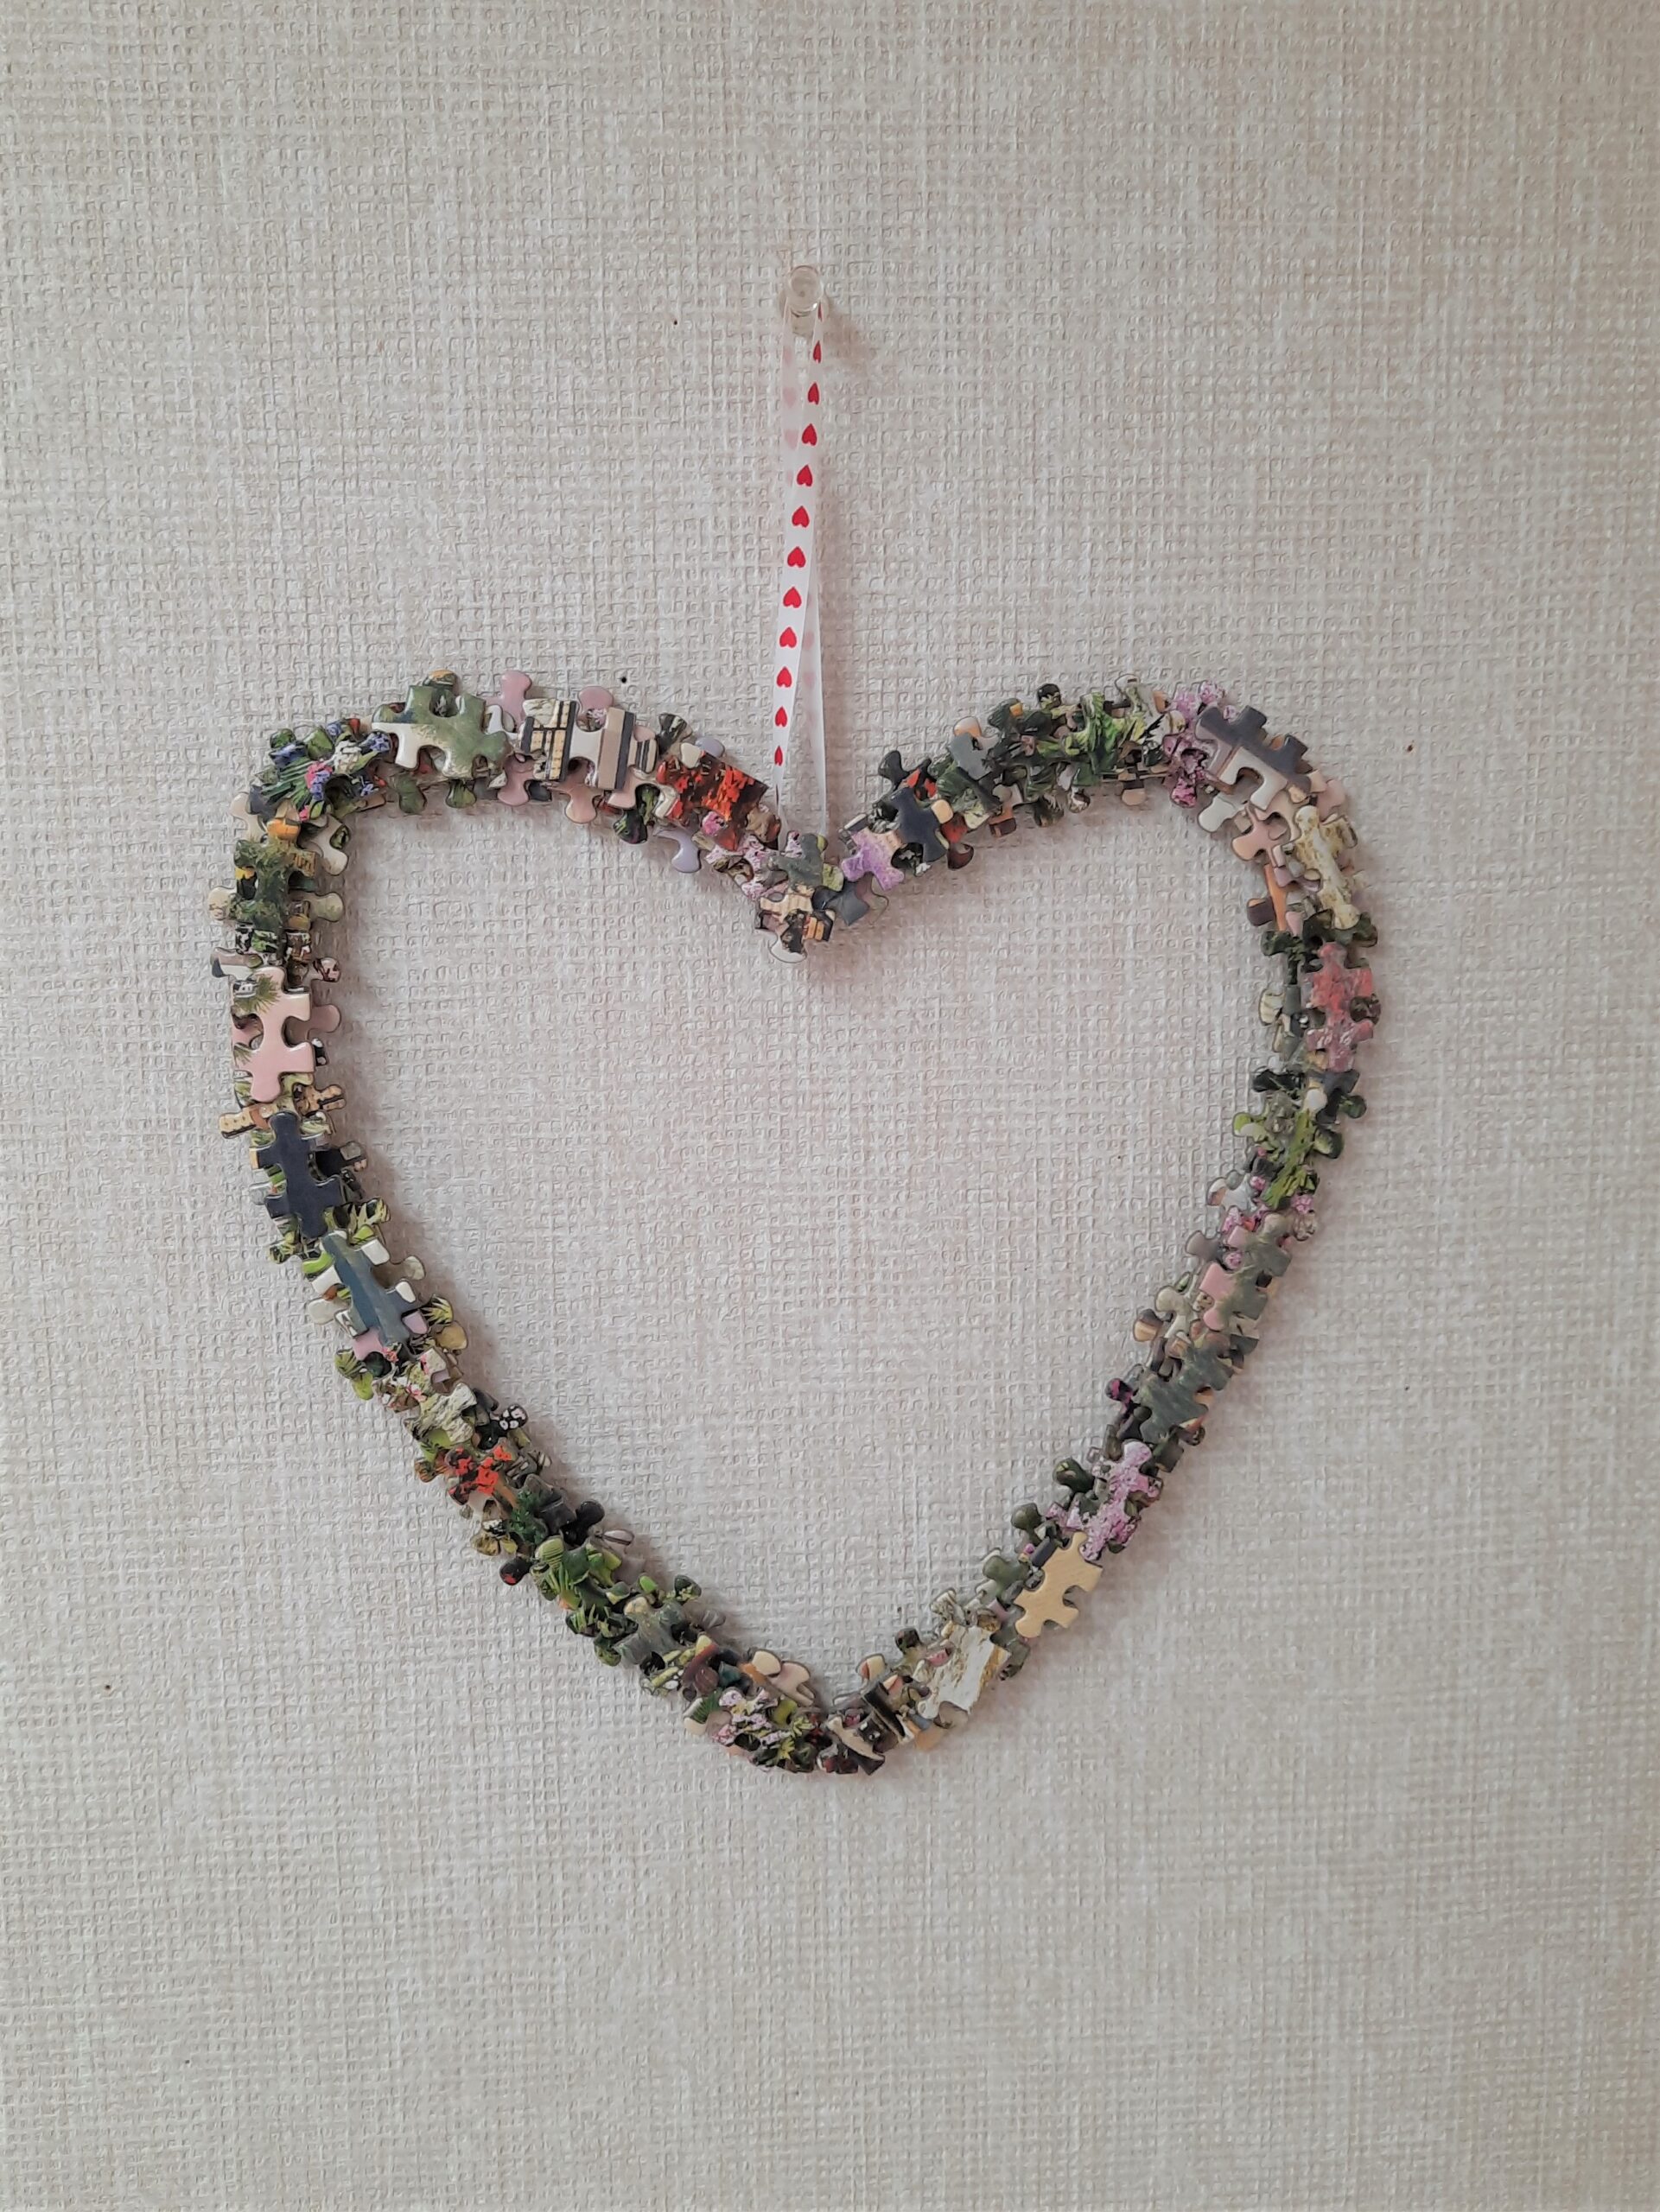 Create A Beautiful Craft Project for Valentine’s Day!